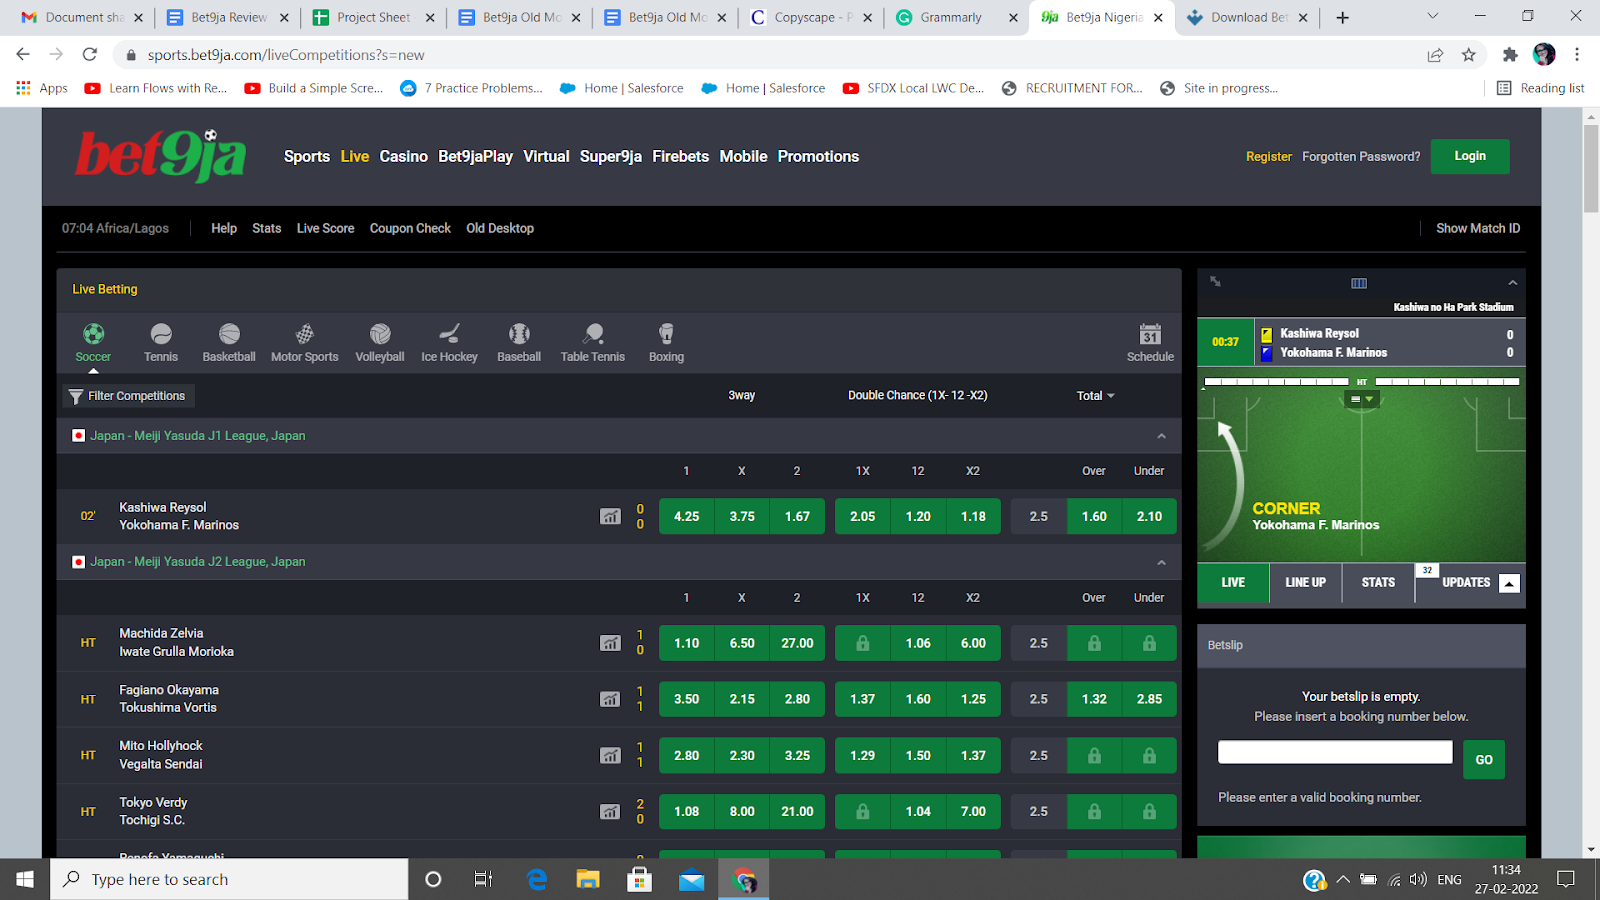 Home page of the web version of Bet9ja site.